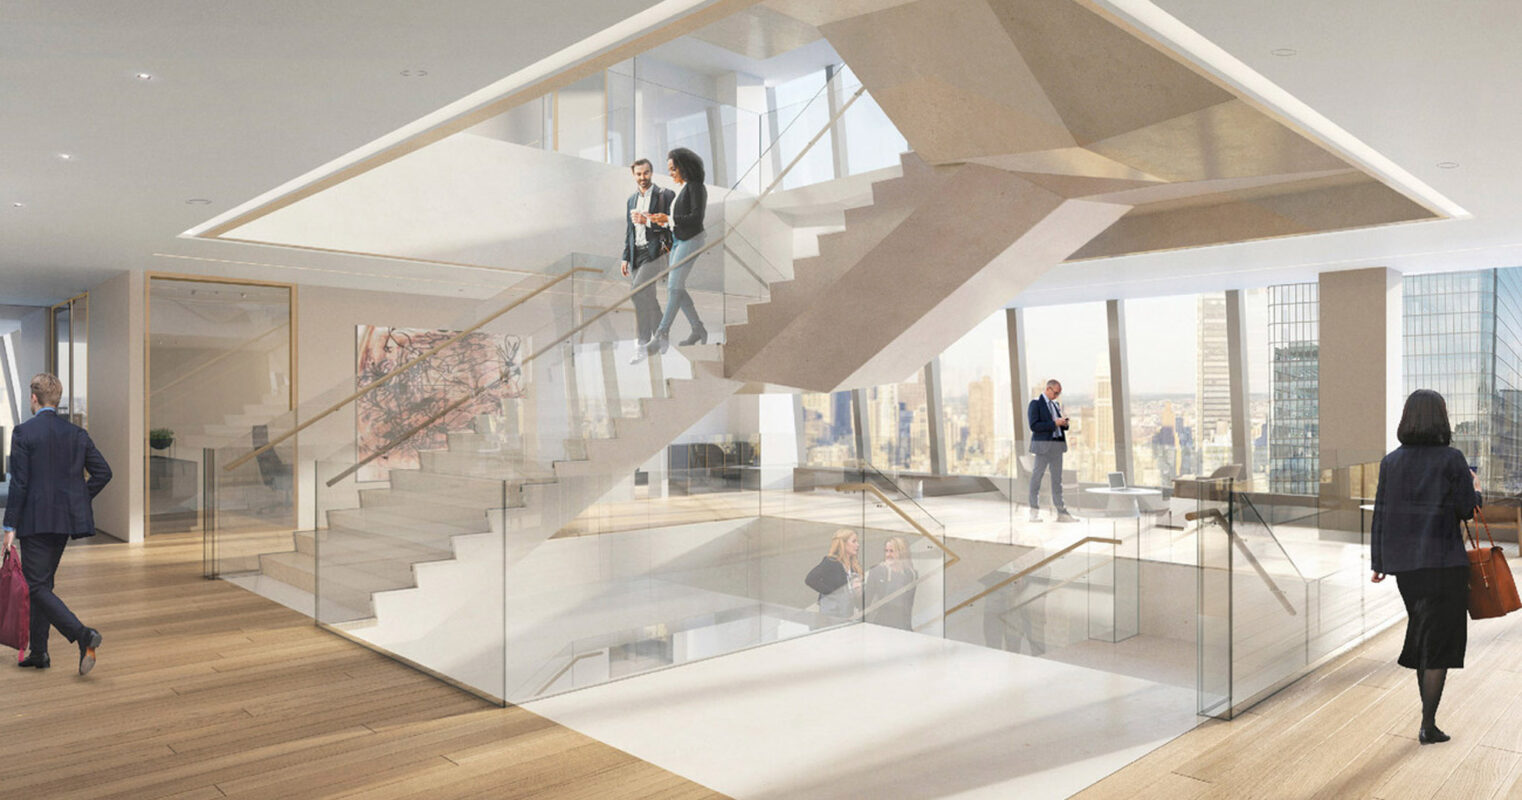 Modern office foyer boasting a striking floating staircase with glass balustrades, complemented by warm wooden floors and ample natural light. Open floor plan encourages fluid movement and interaction among professionals in a contemporary setting.